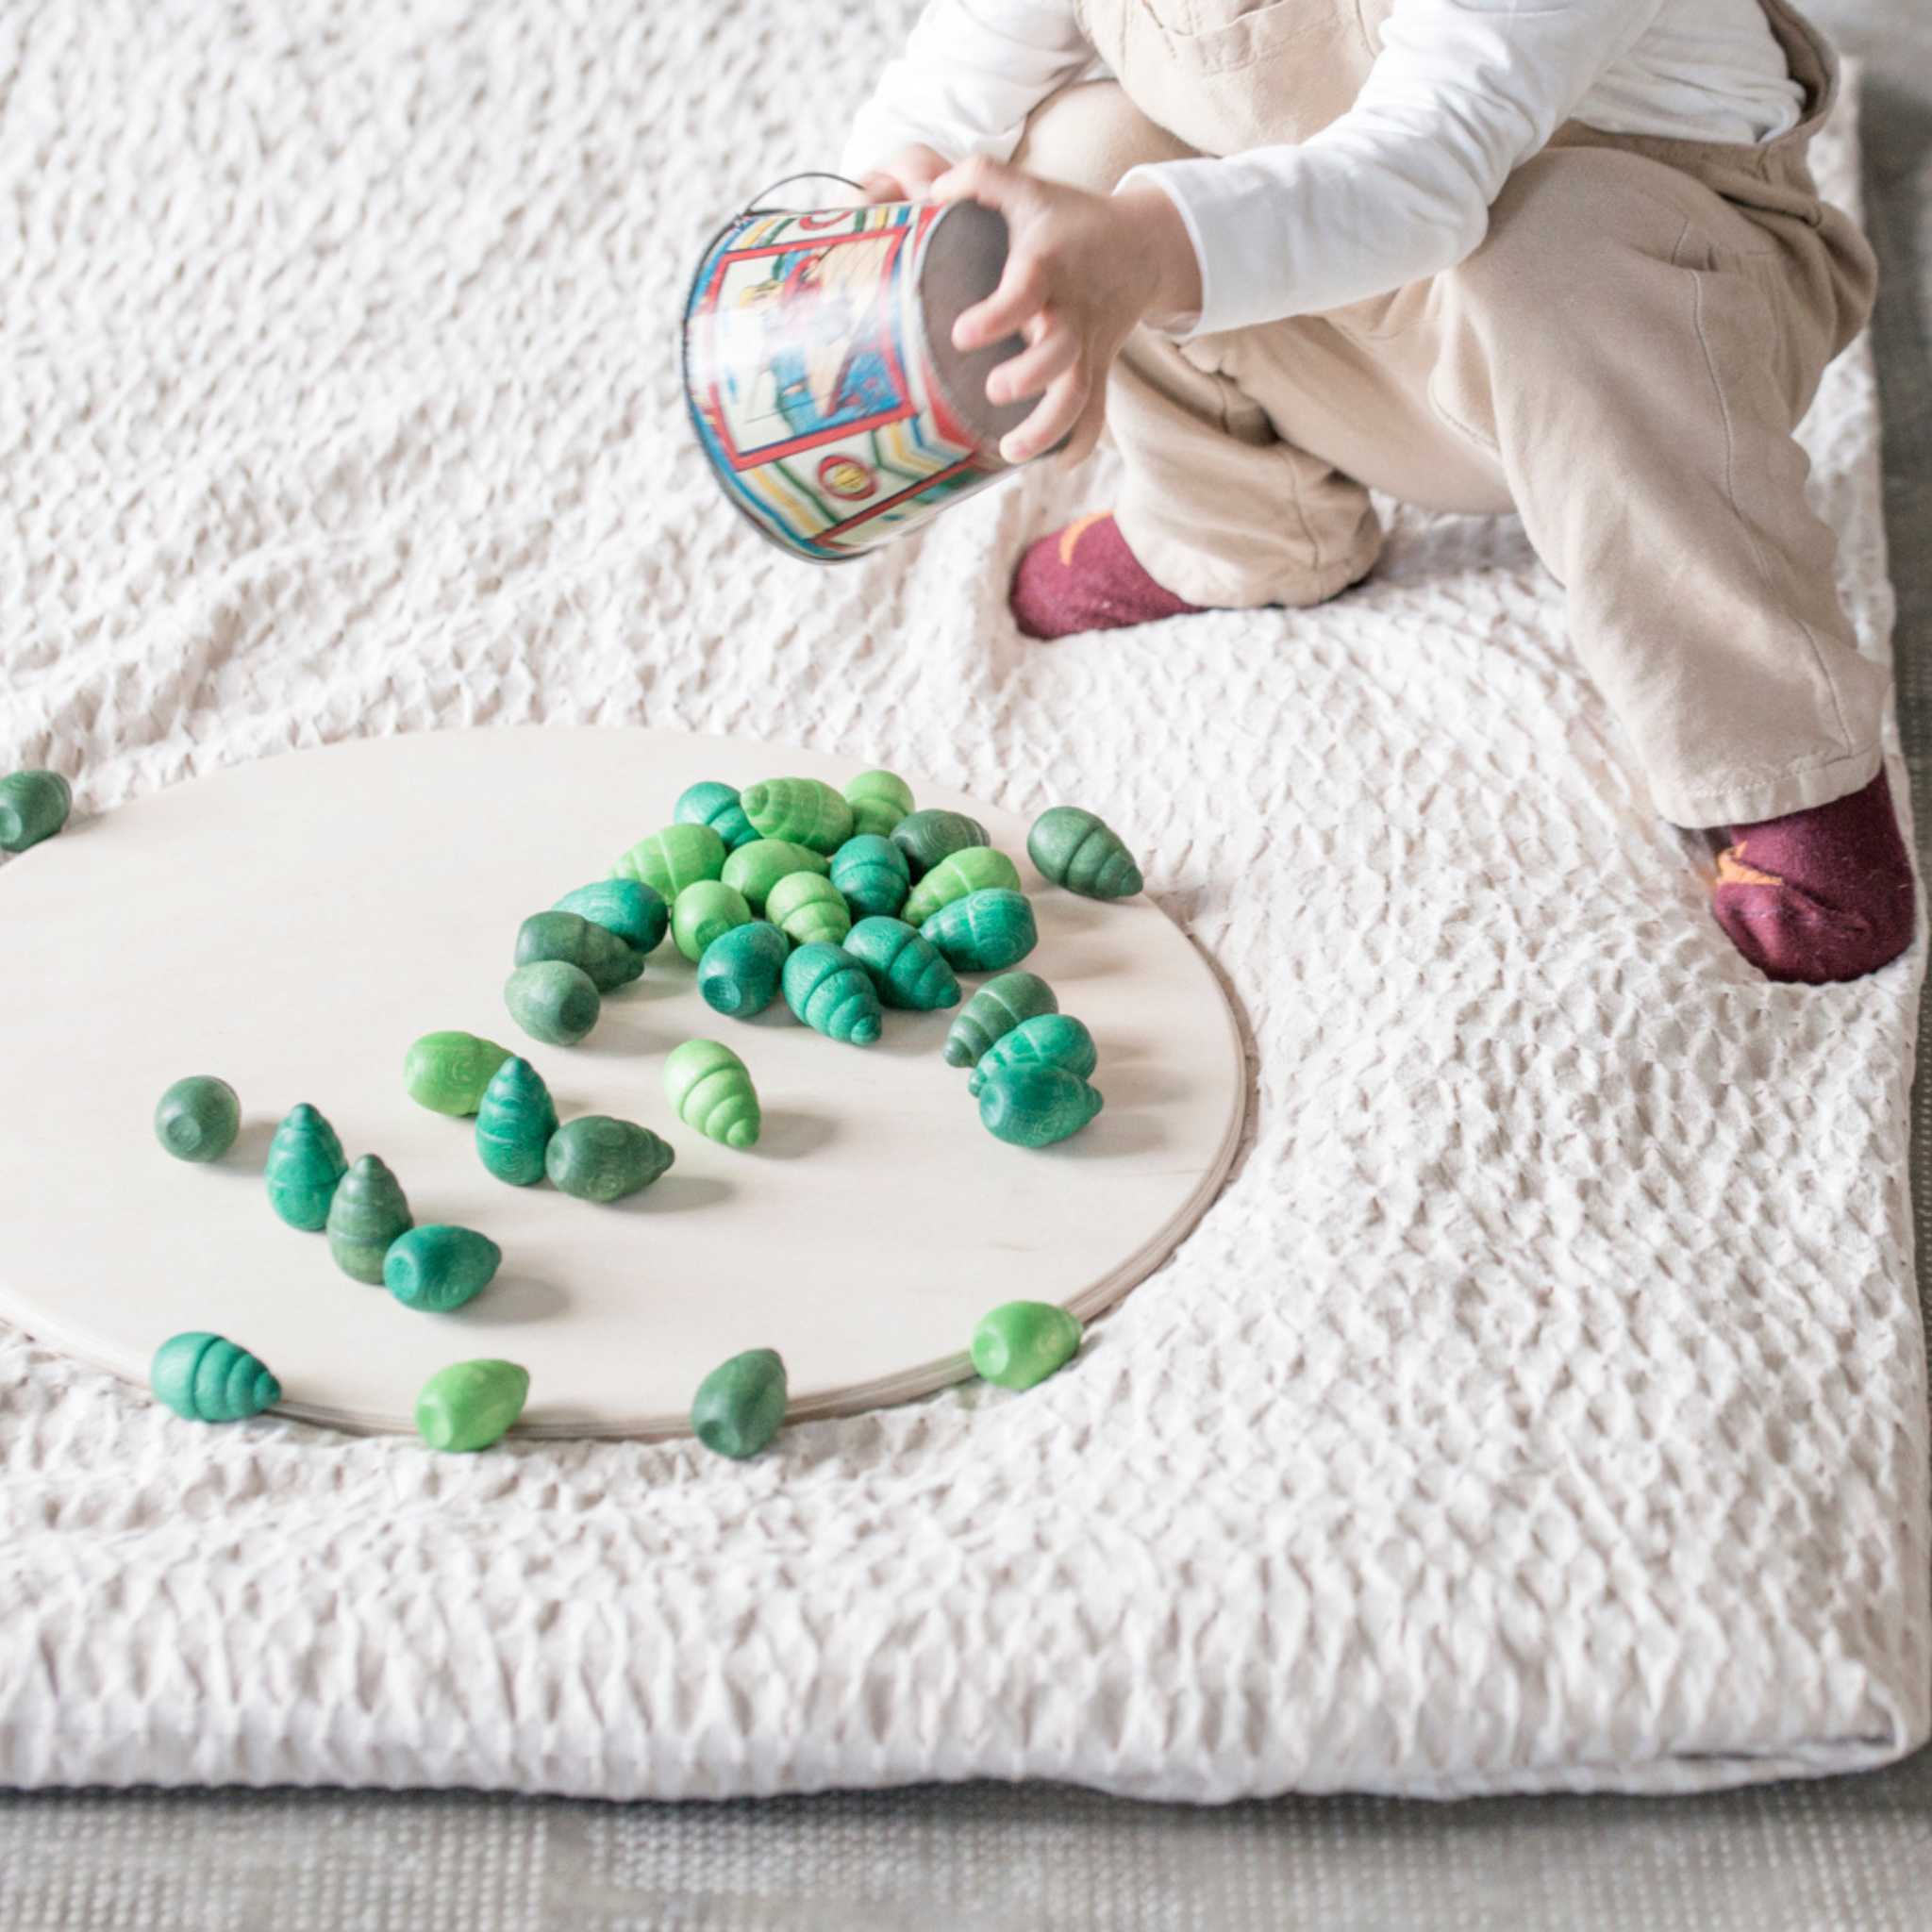 Child Playing With Grapat Mandala Trees On Blanket